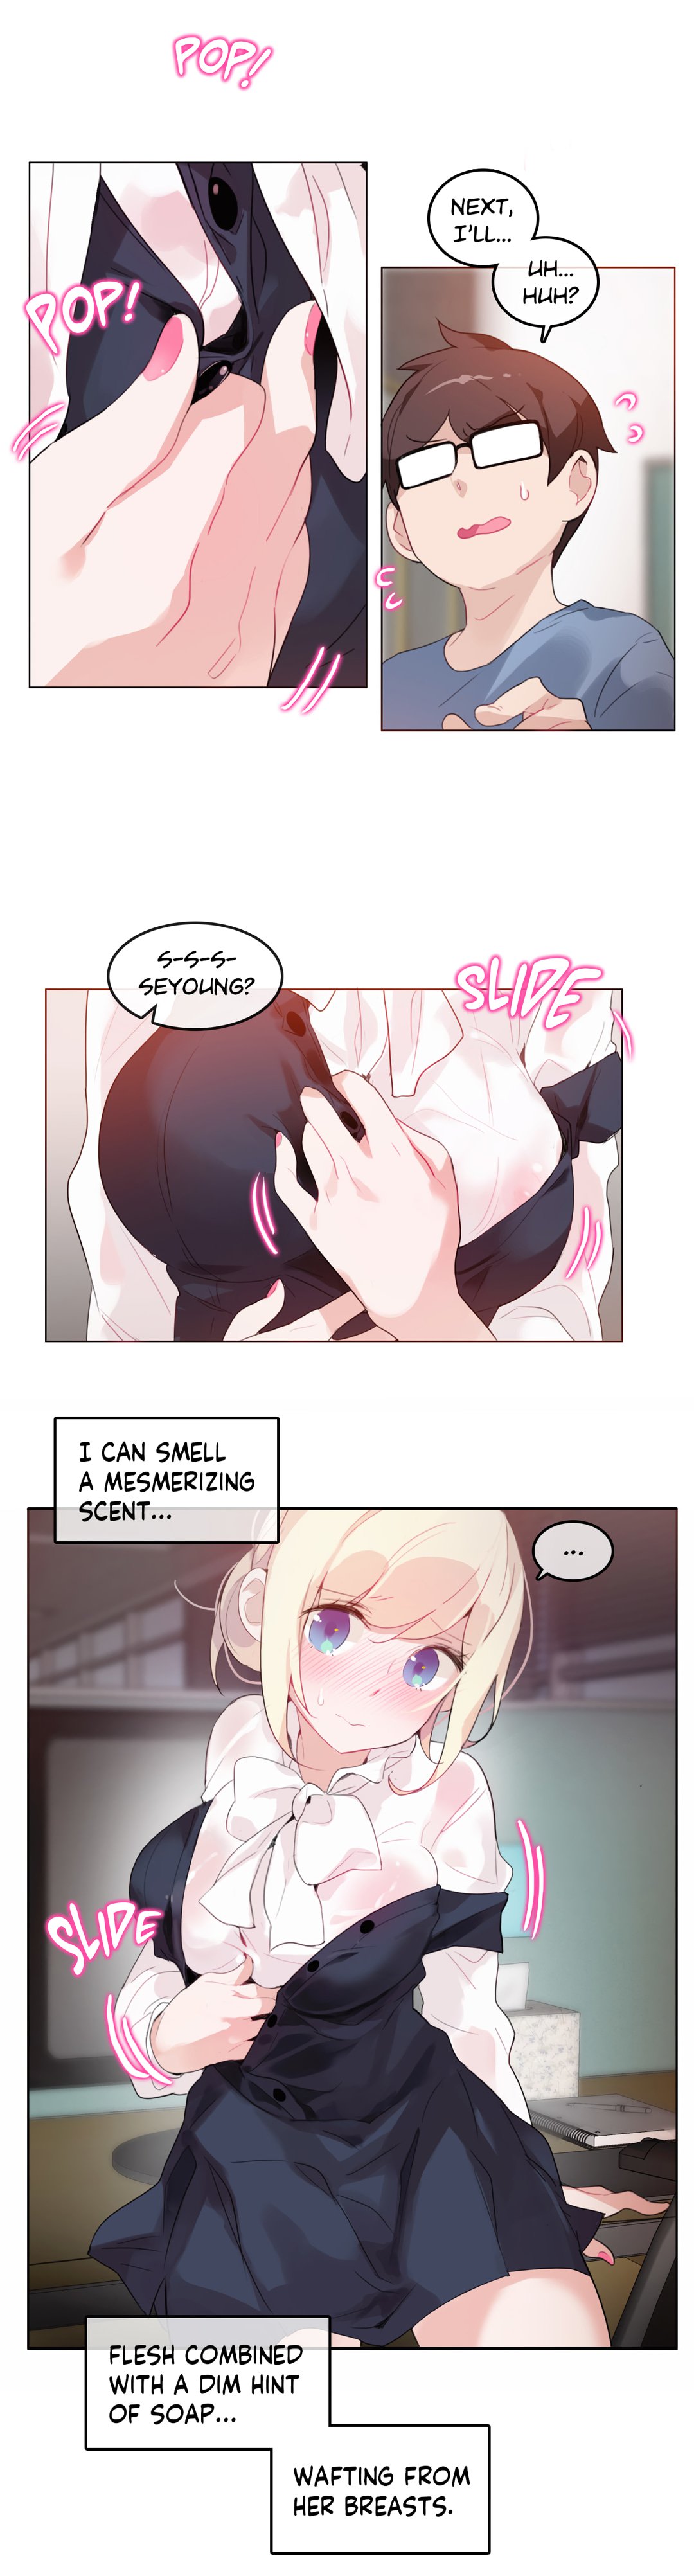 A Pervert's Daily Life - 24 page 5